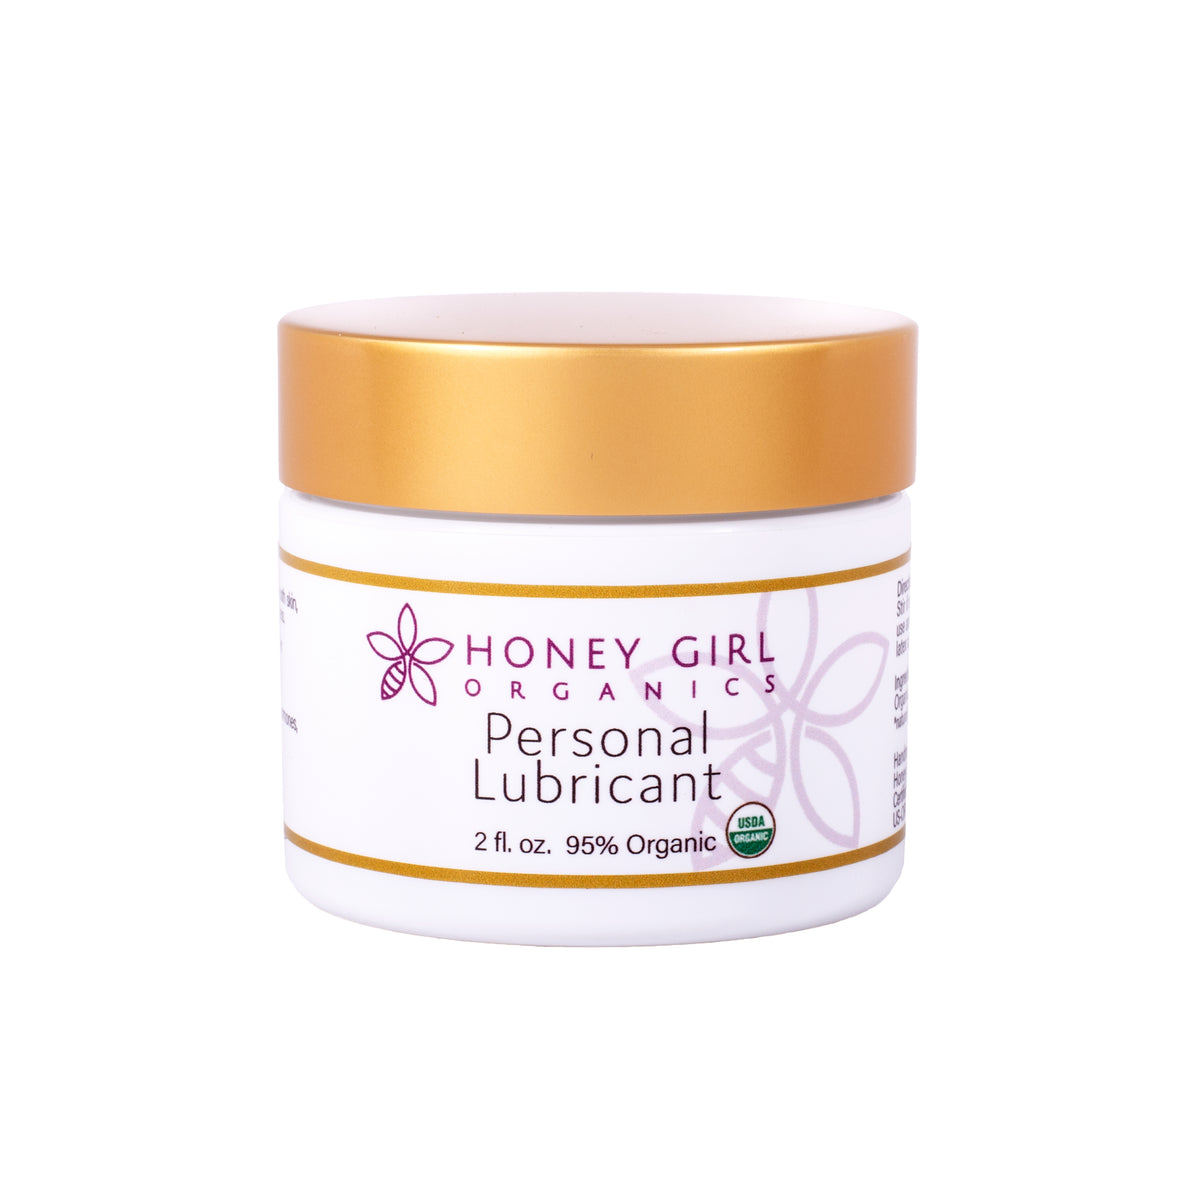 Personal Lubricant (2oz) | Honey Girl | Raw Living UK | Honey Girl Organics Personal Lubricant is a lubricant that soothes your skin &amp; enhances intimacy. It helps relieve dryness &amp; it is 100% safe to use internally.